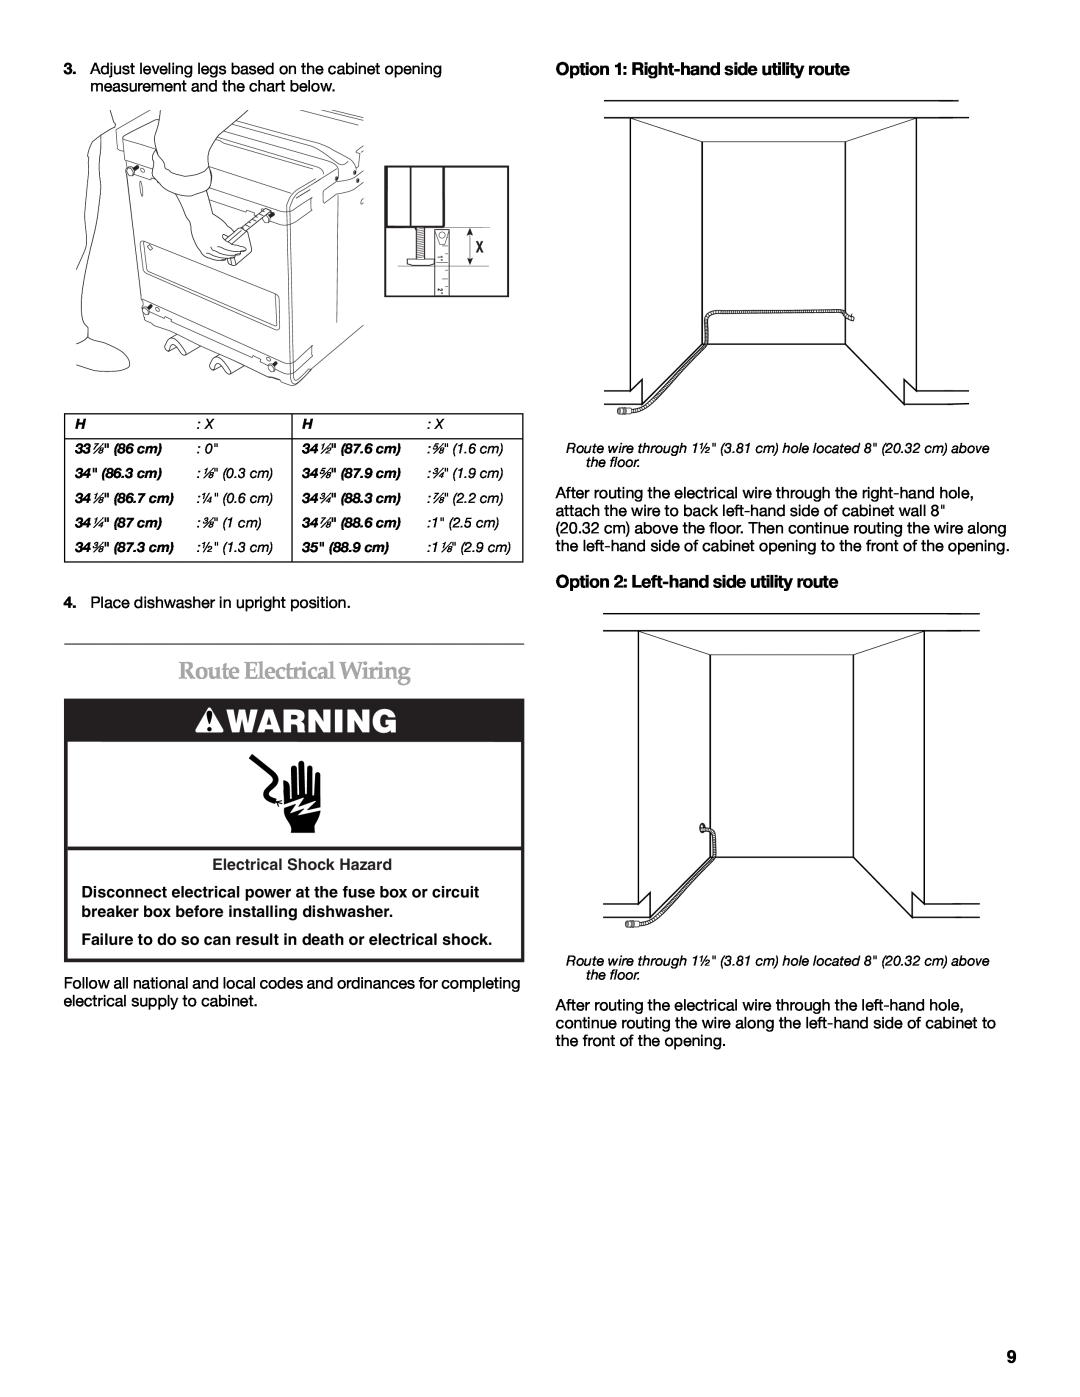 KitchenAid W10118037B installation instructions Route Electrical Wiring, Option 1 Right-hand side utility route 